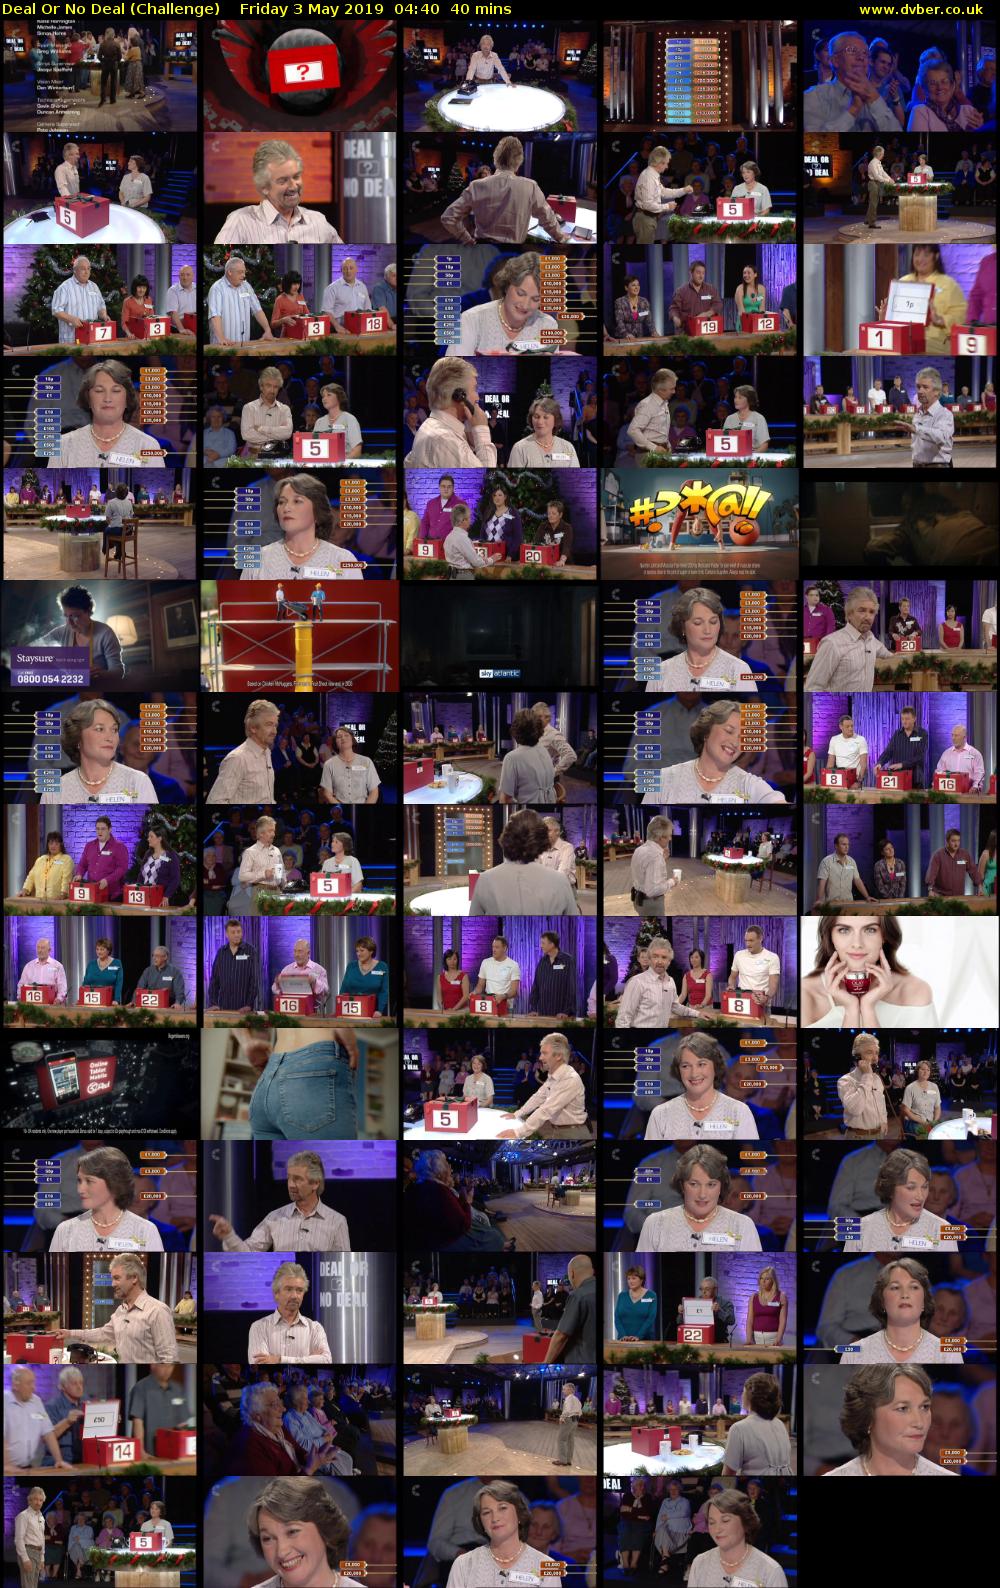 Deal Or No Deal (Challenge) Friday 3 May 2019 04:40 - 05:20